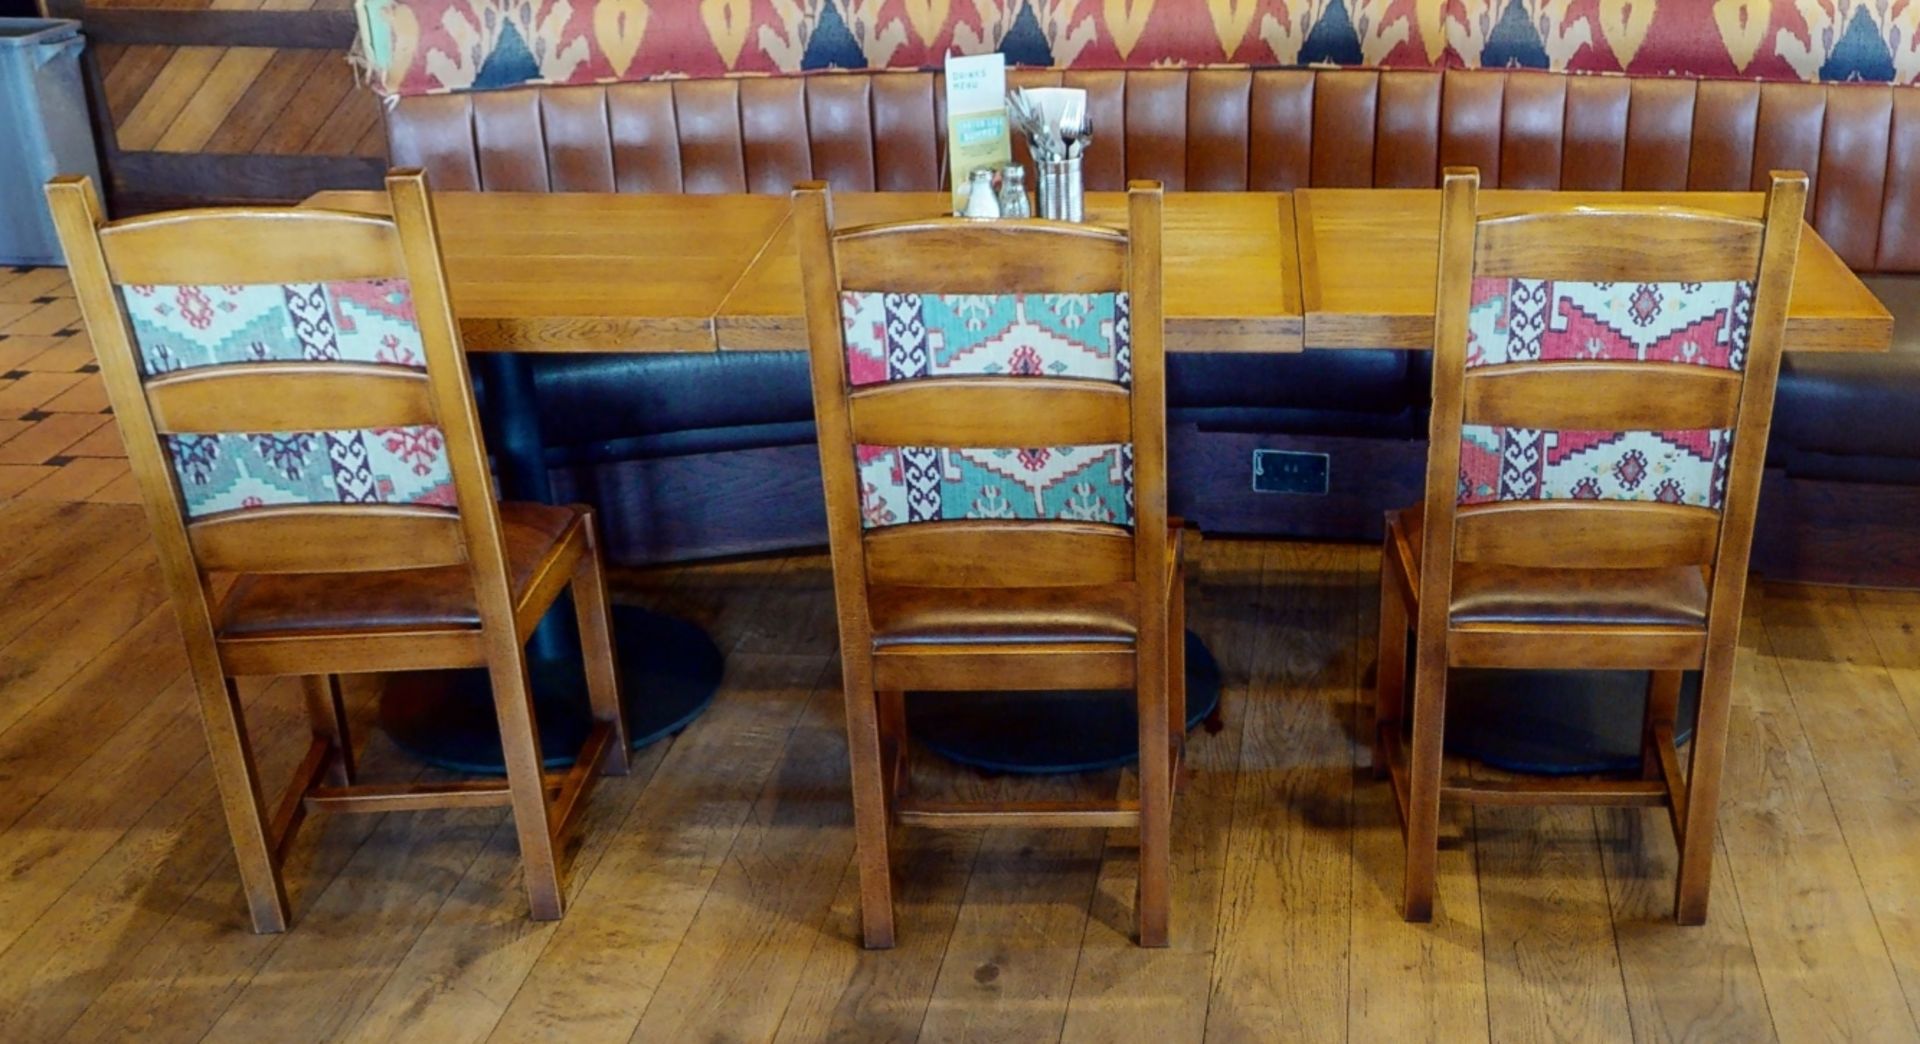 15 x Restaurant High Back Dining Chairs With Faux Leather Brown Seat Pads and Mexican Inspired - Image 5 of 11